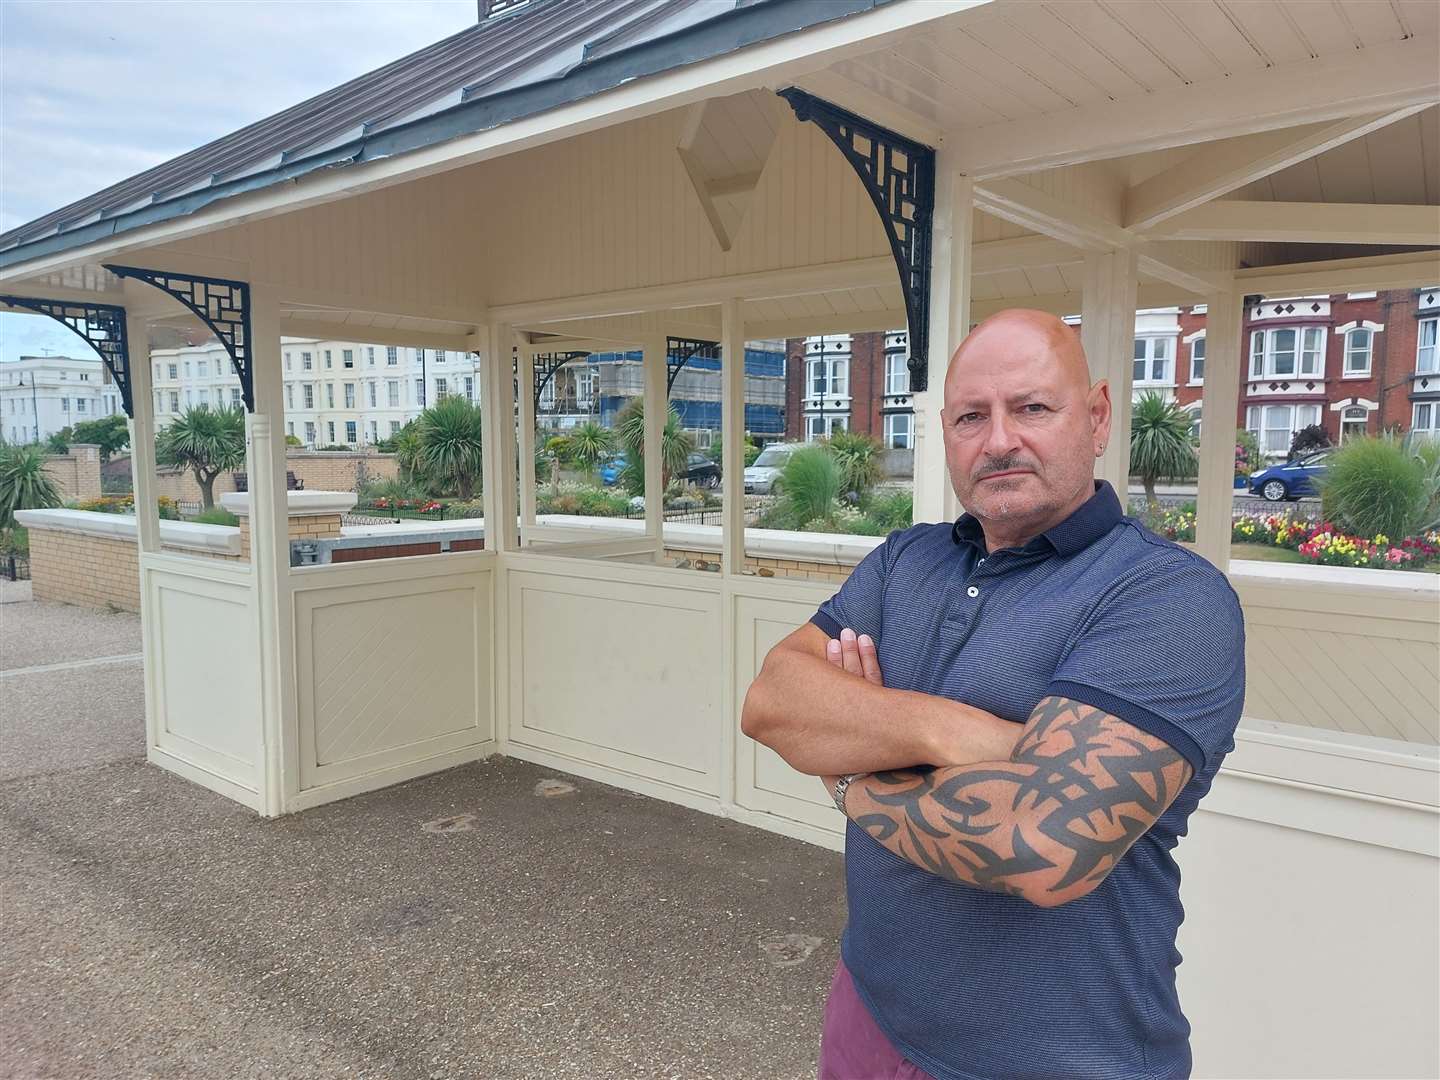 Herne Bay resident Gary Garbett believes Canterbury City Council's decision to remove the seats is "letting vandals win"